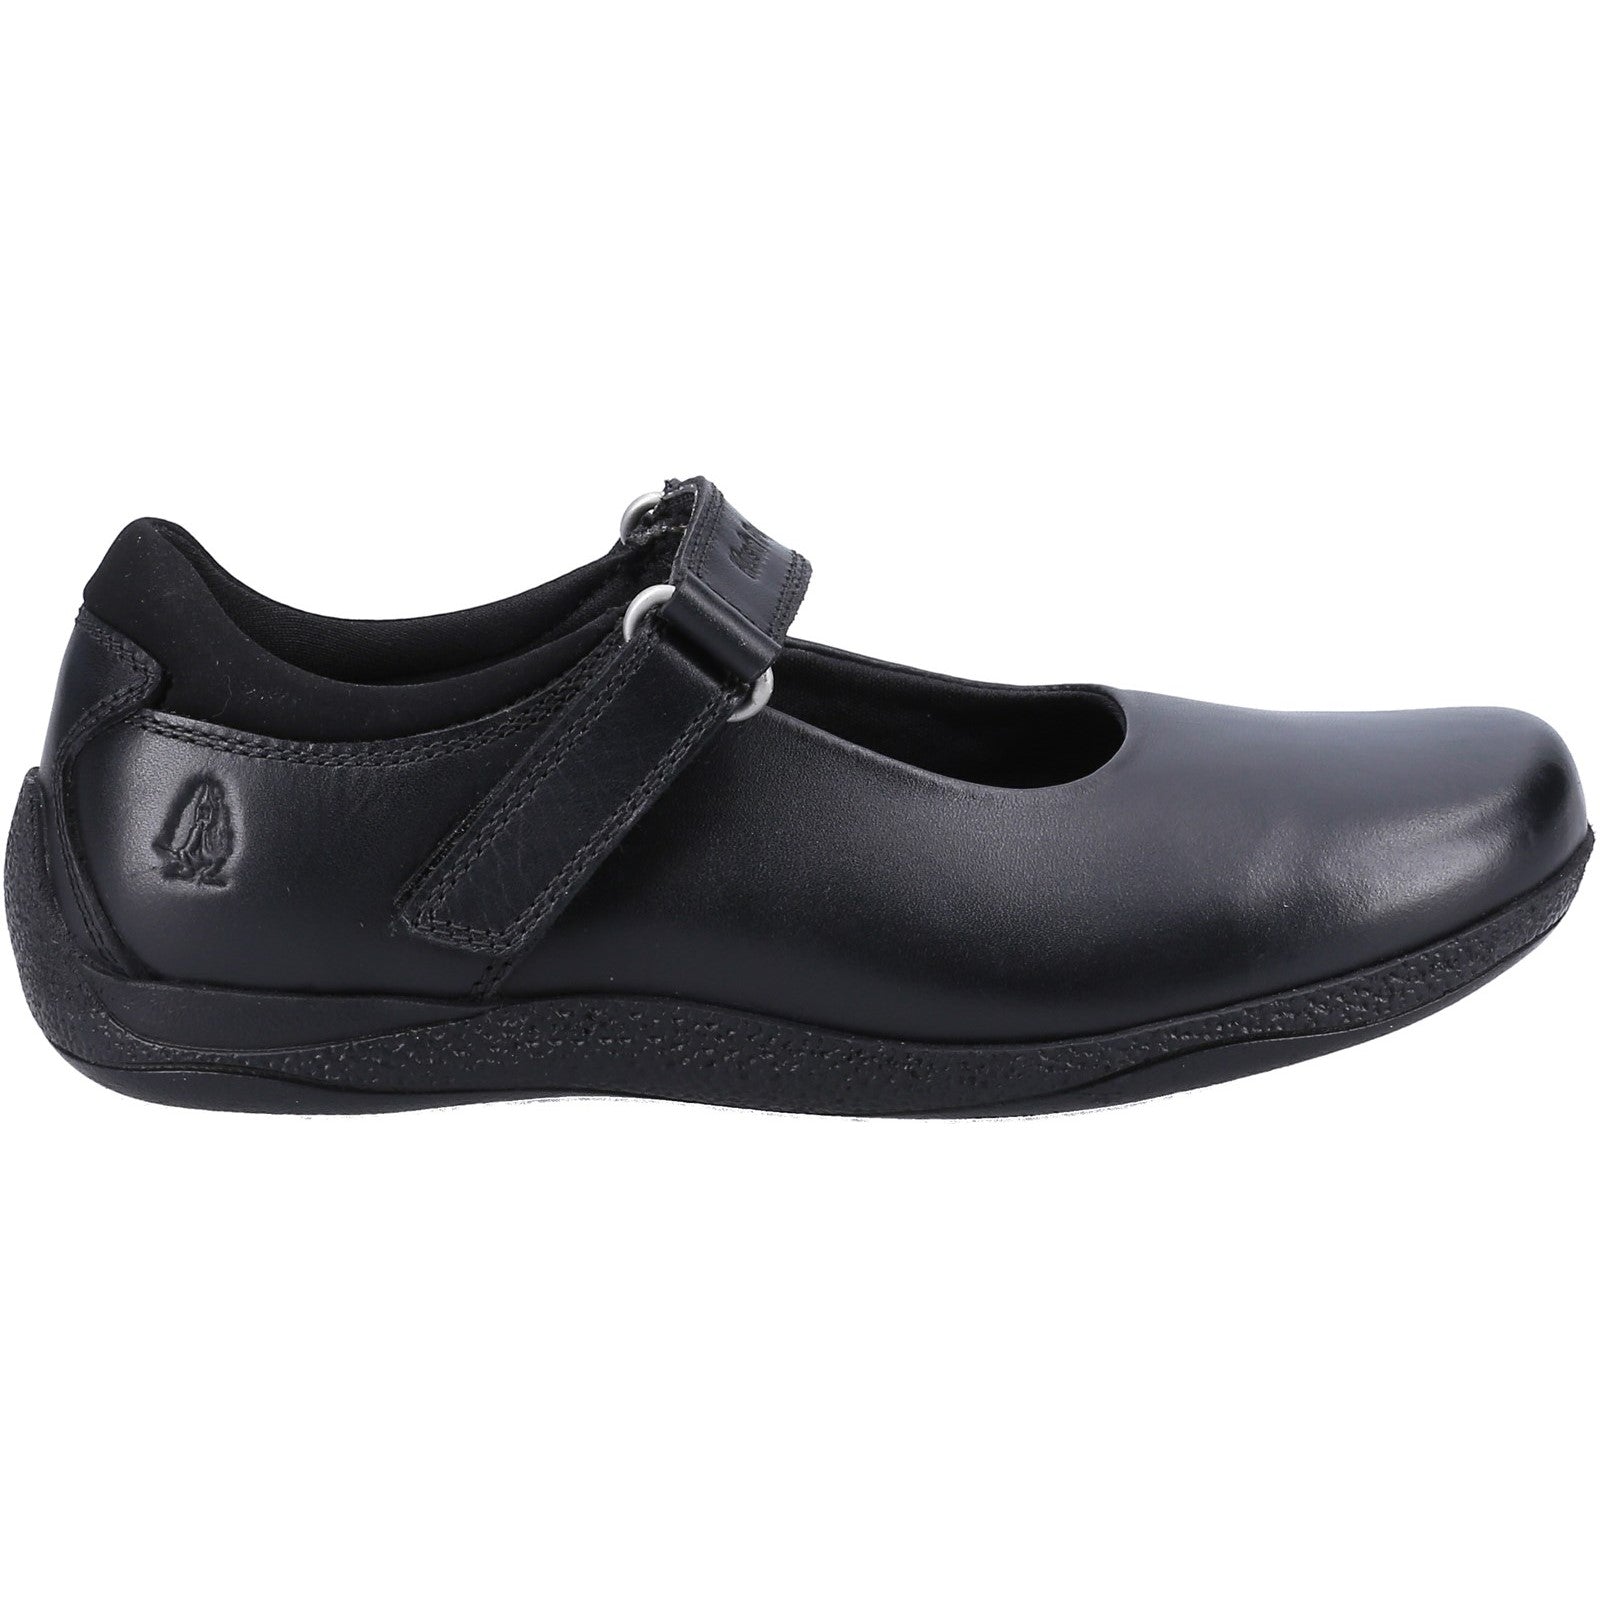 Hush Puppies Girls Marcie Leather School Shoes - Black